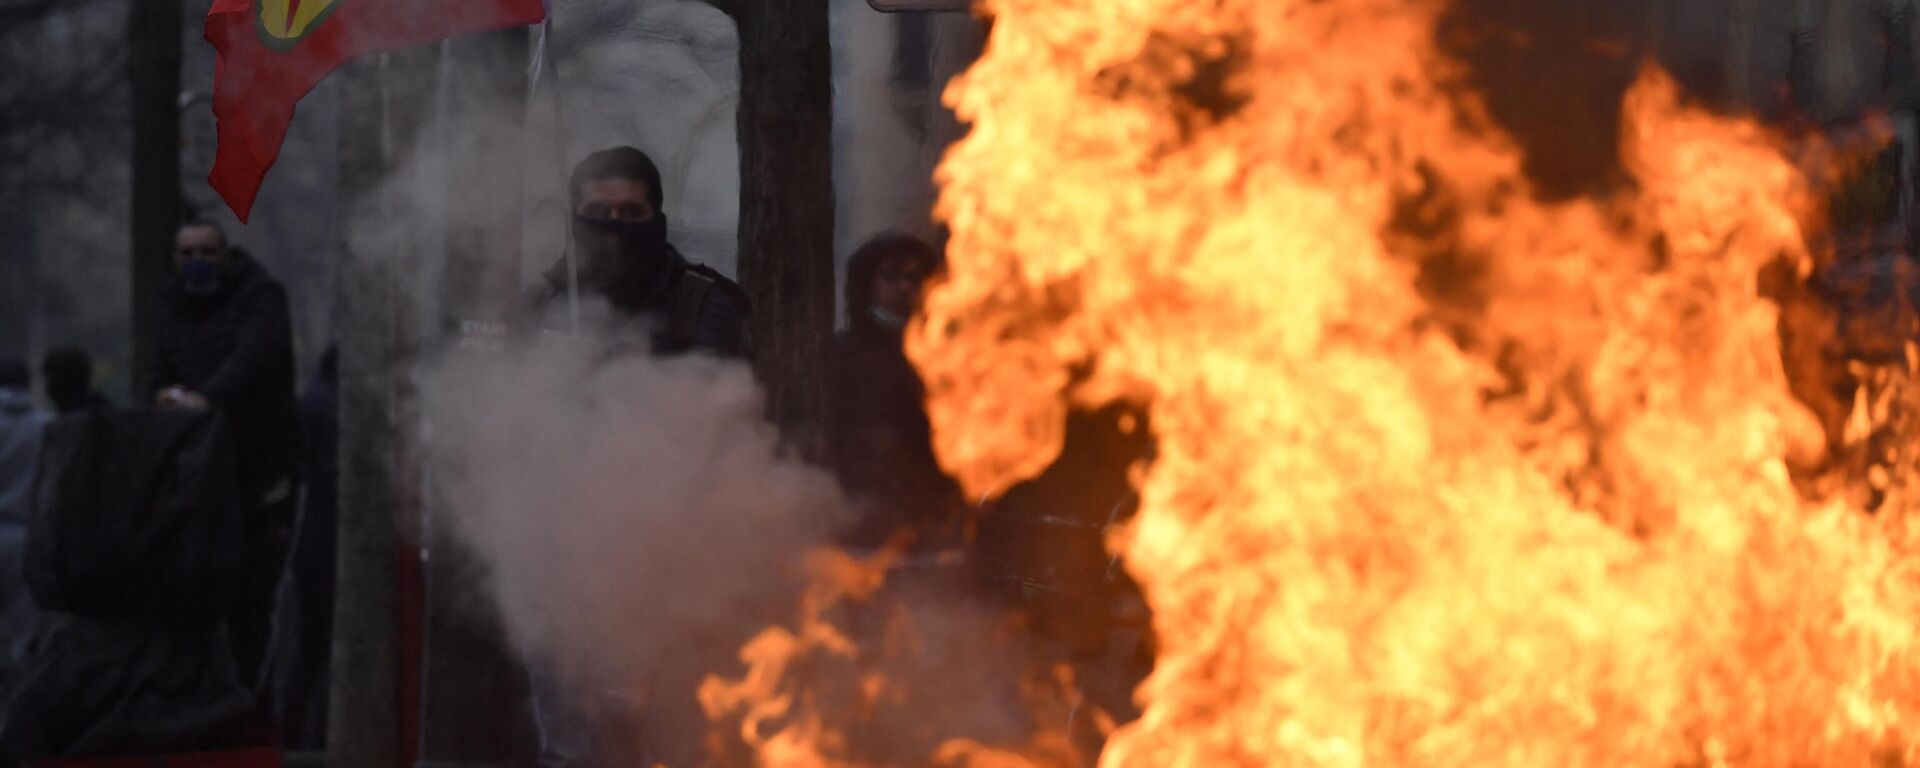 A protester holds a Kurdish workers party (PKK) flag behind a fire during clashes following a demonstration of supporters and members of the Kurdish community, a day after a gunman opened fire at a Kurdish cultural centre killing three people, at The Place de la Republique in Paris on December 24, 2022 - Sputnik International, 1920, 25.12.2022